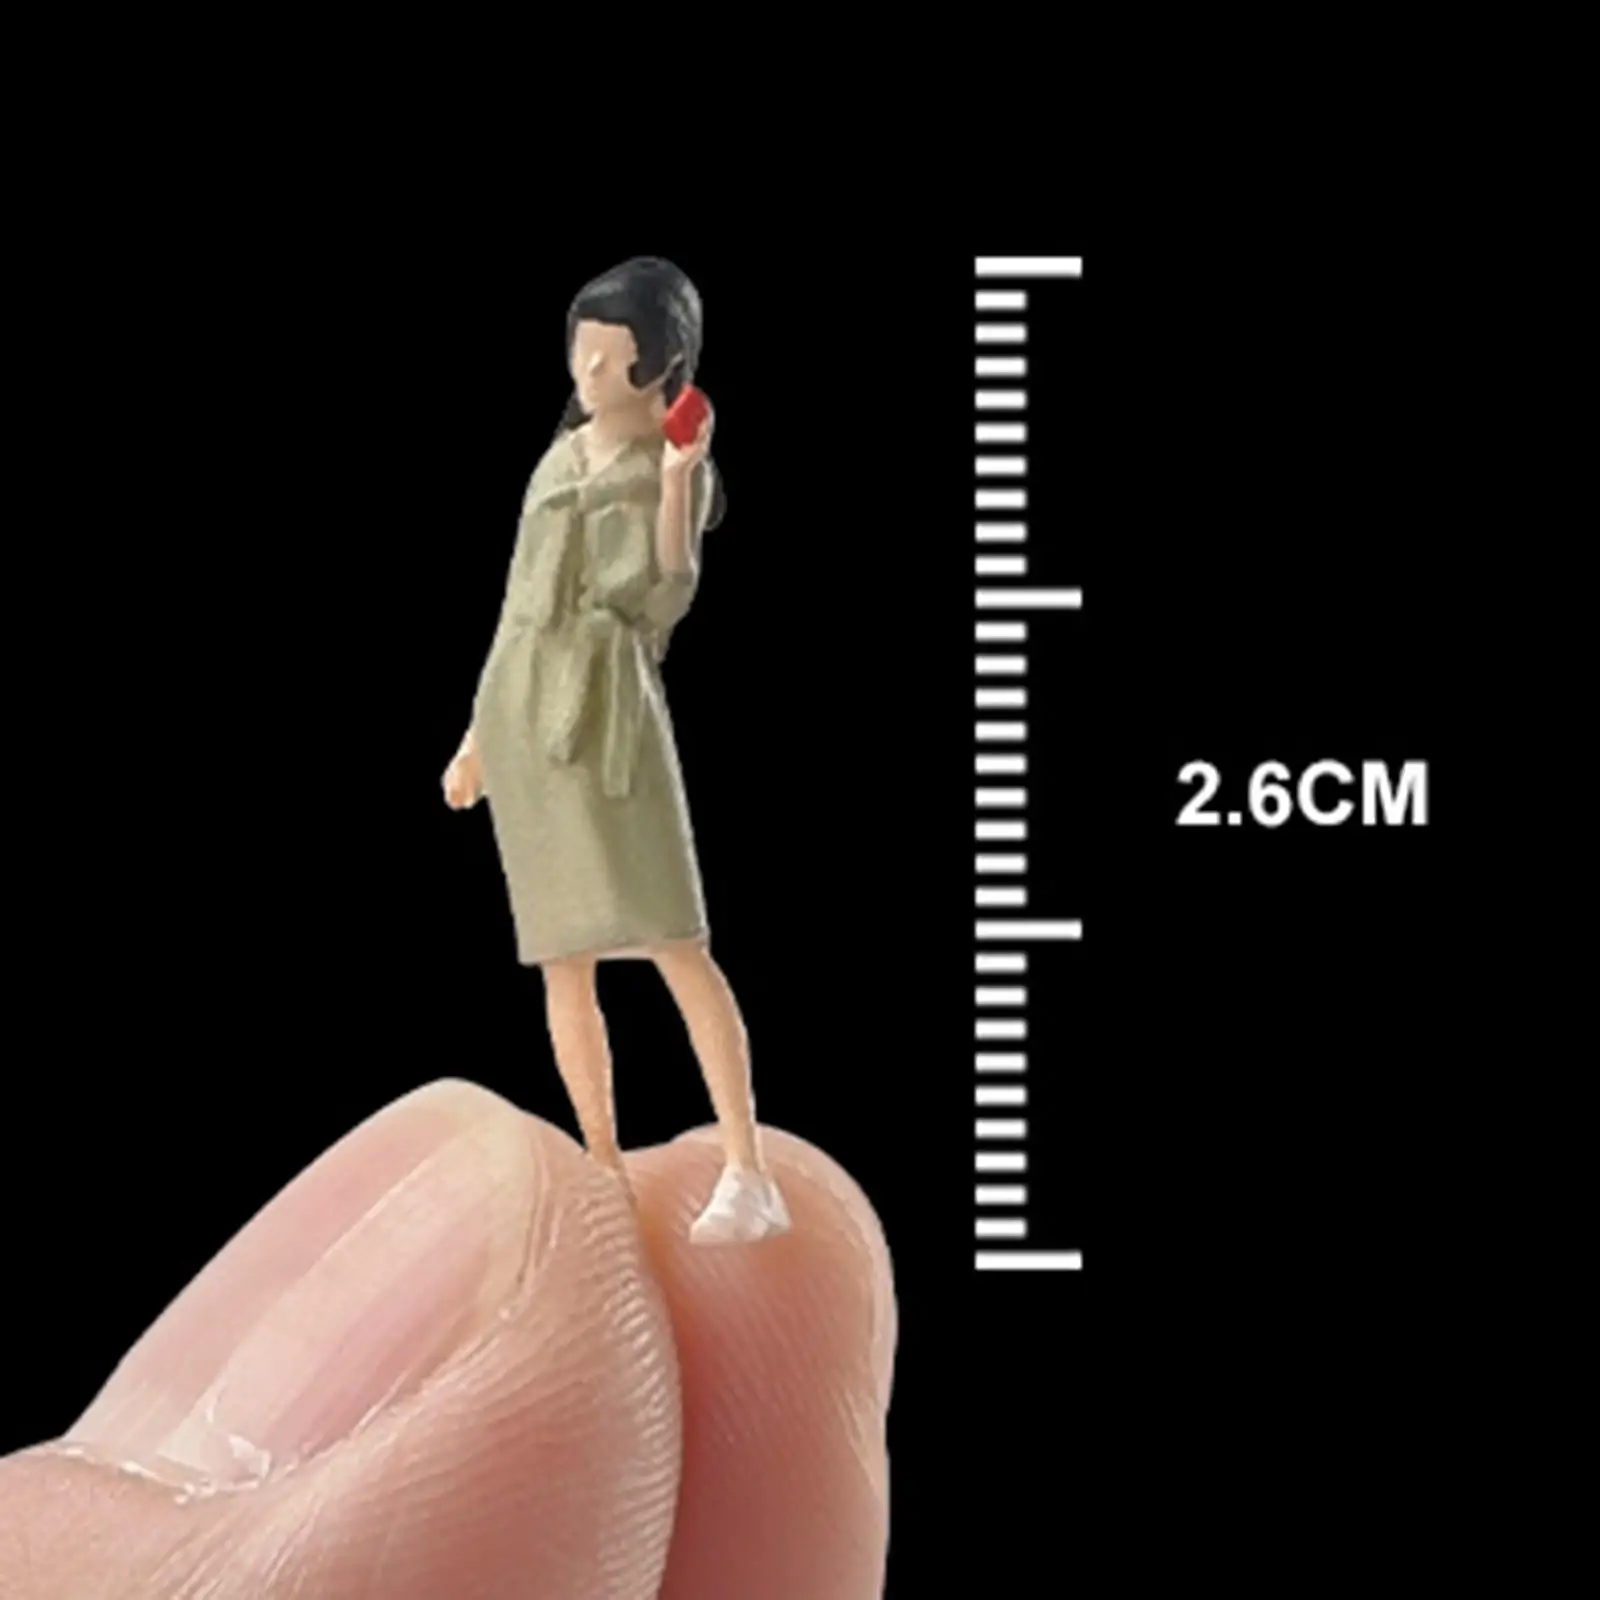 Painted Figures Stimulated Tiny Role Play Figure Diorama Scenery 1:64 Scale Miniature Girls Model for Sand Table Miniature Scene